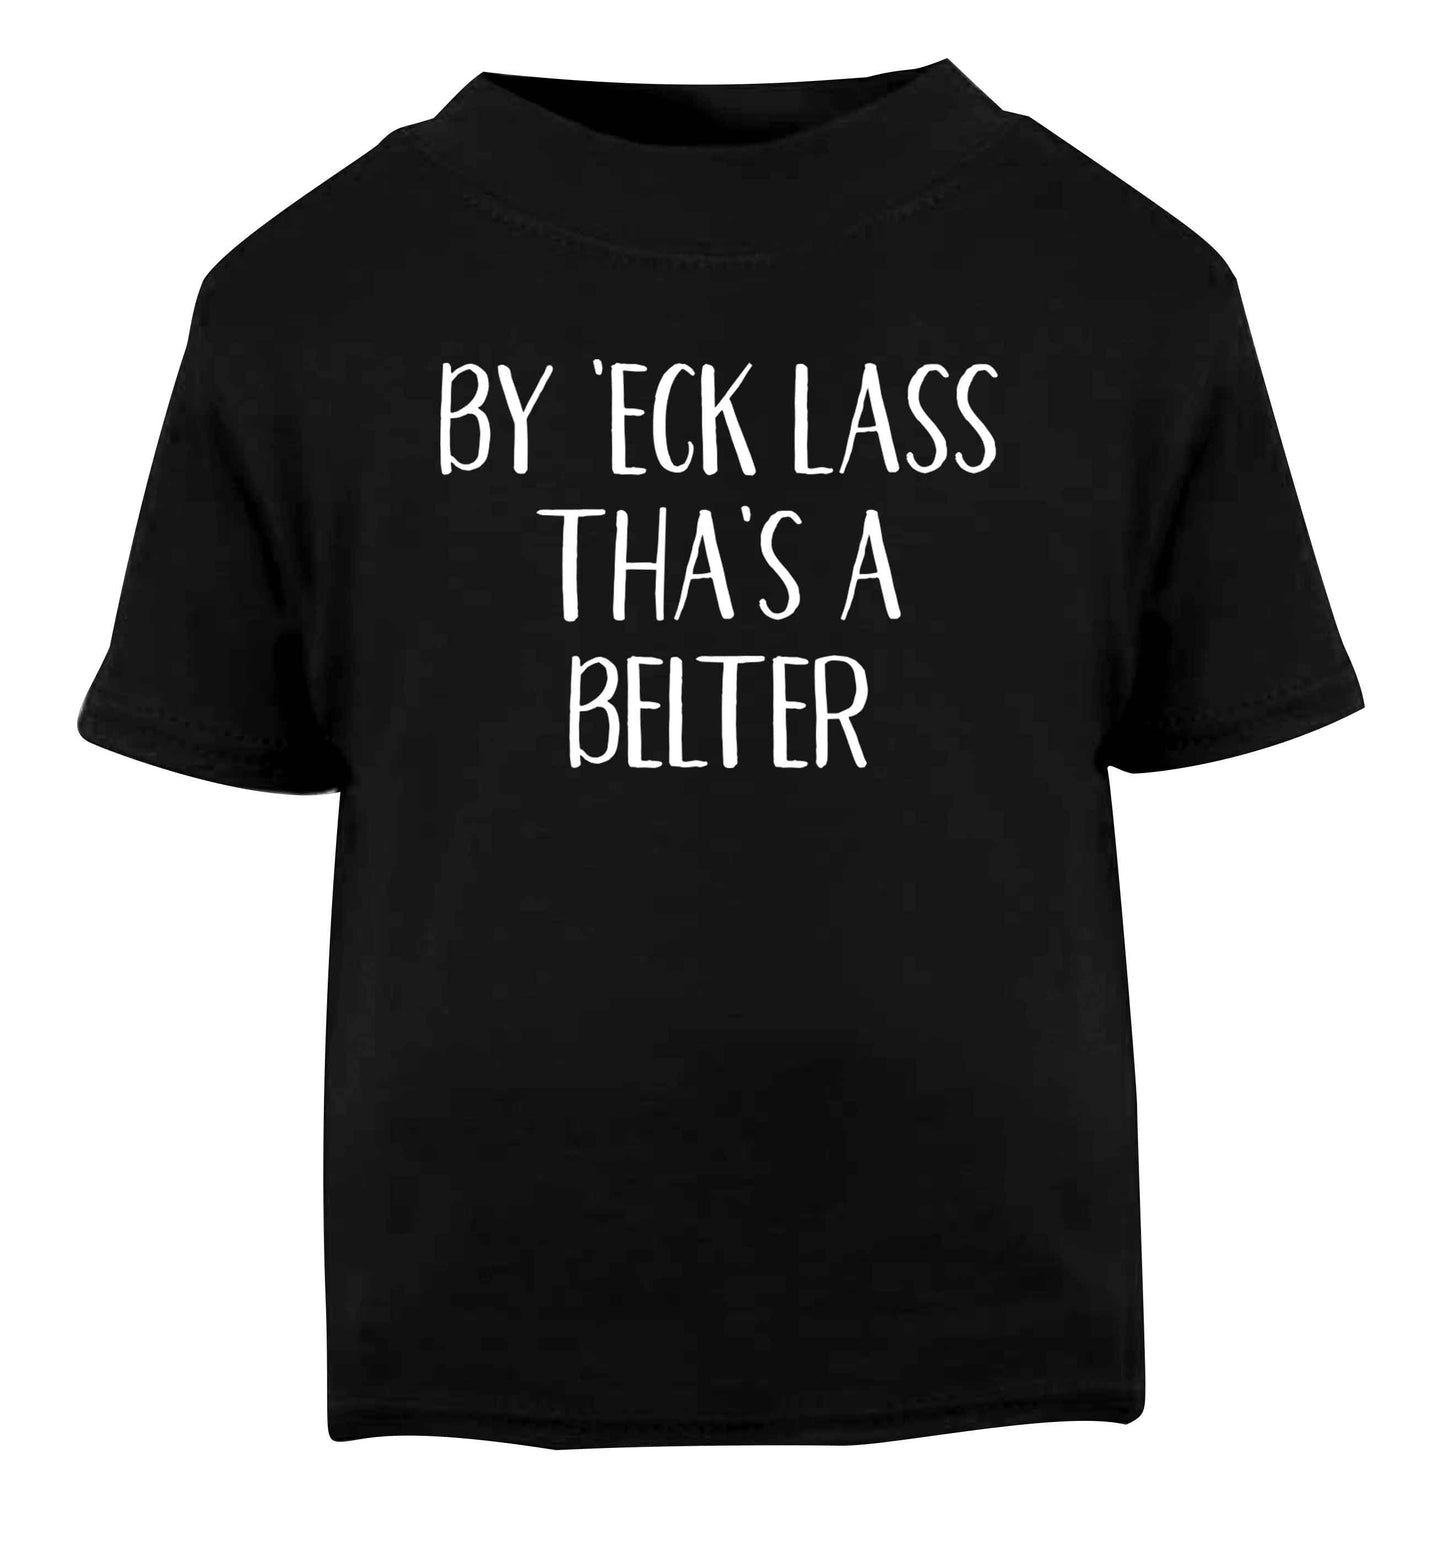 Be 'eck lass tha's a belter Black Baby Toddler Tshirt 2 years